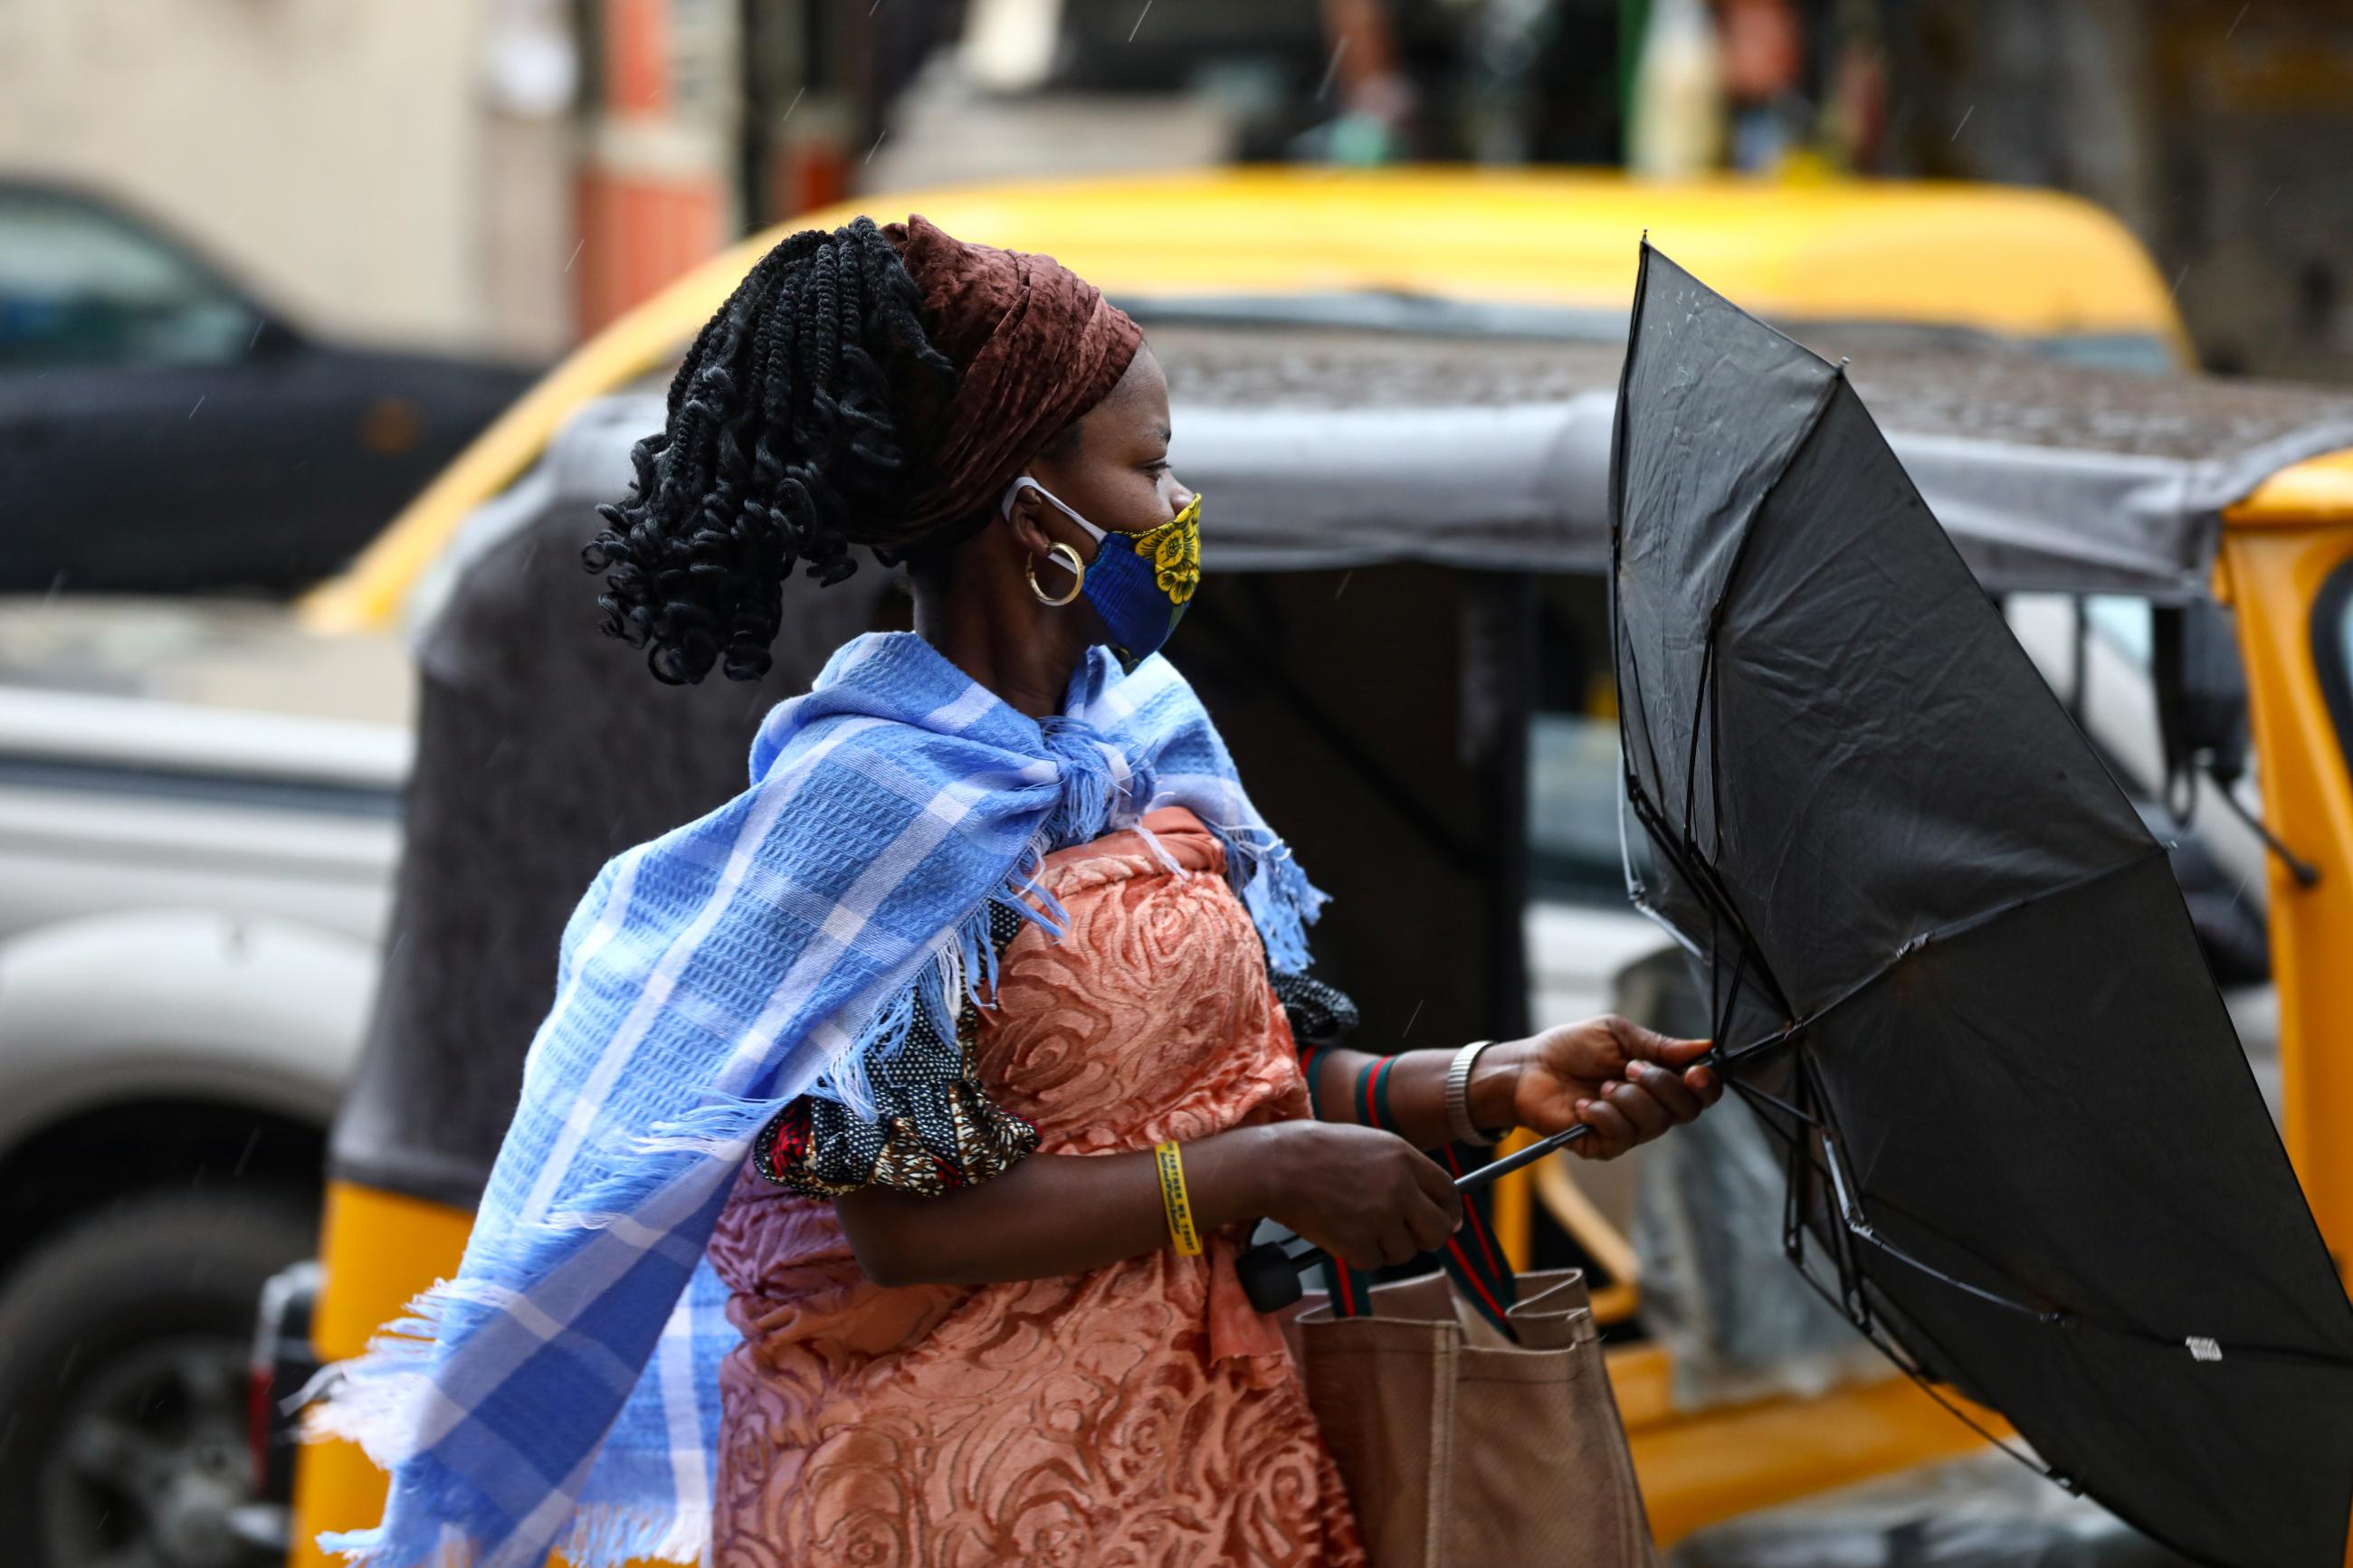 A woman wearing a mask in Lagos, Nigeria on May 4, 2020. Public health experts believe COVID mask requirements helped reduce monkeypox transmission during air travel.